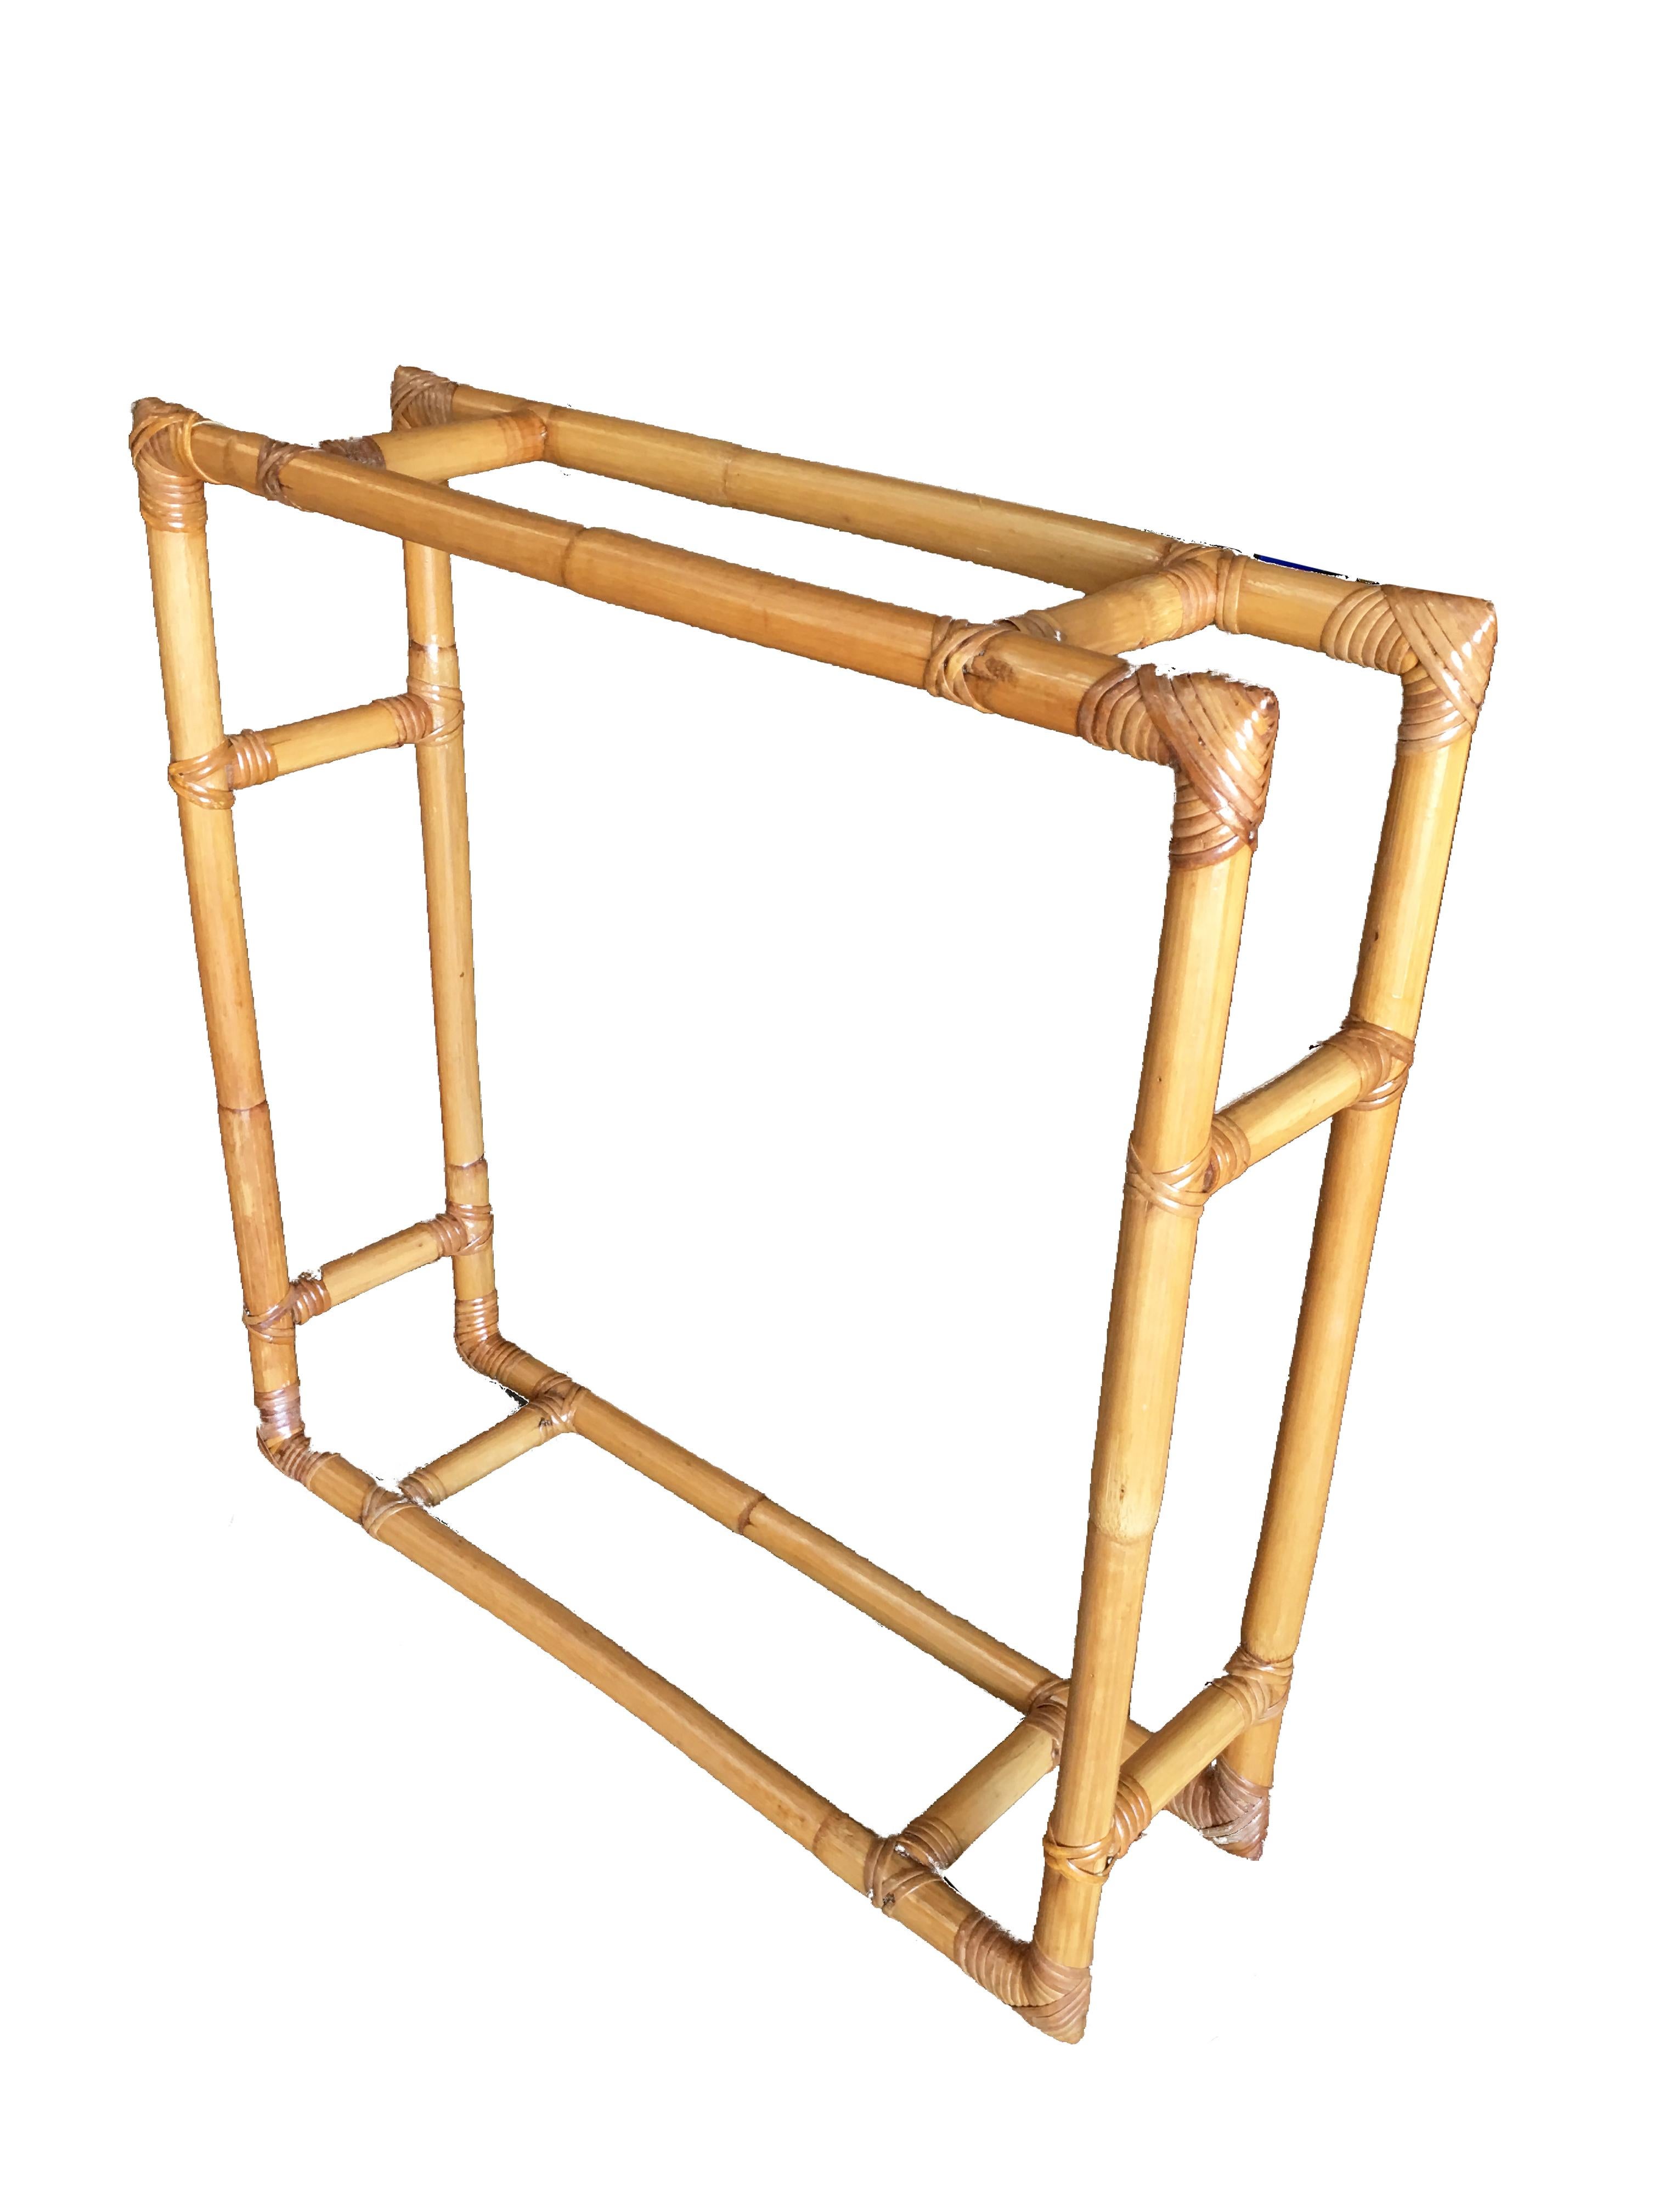 Square rattan wall shelf, circa 1950. This rare rattan wall shelf features a unique 2-strand rattan frame made with two cross sections that hold two glass shelves.

Professionally restored in 2019

All rattan, bamboo and wicker furniture has